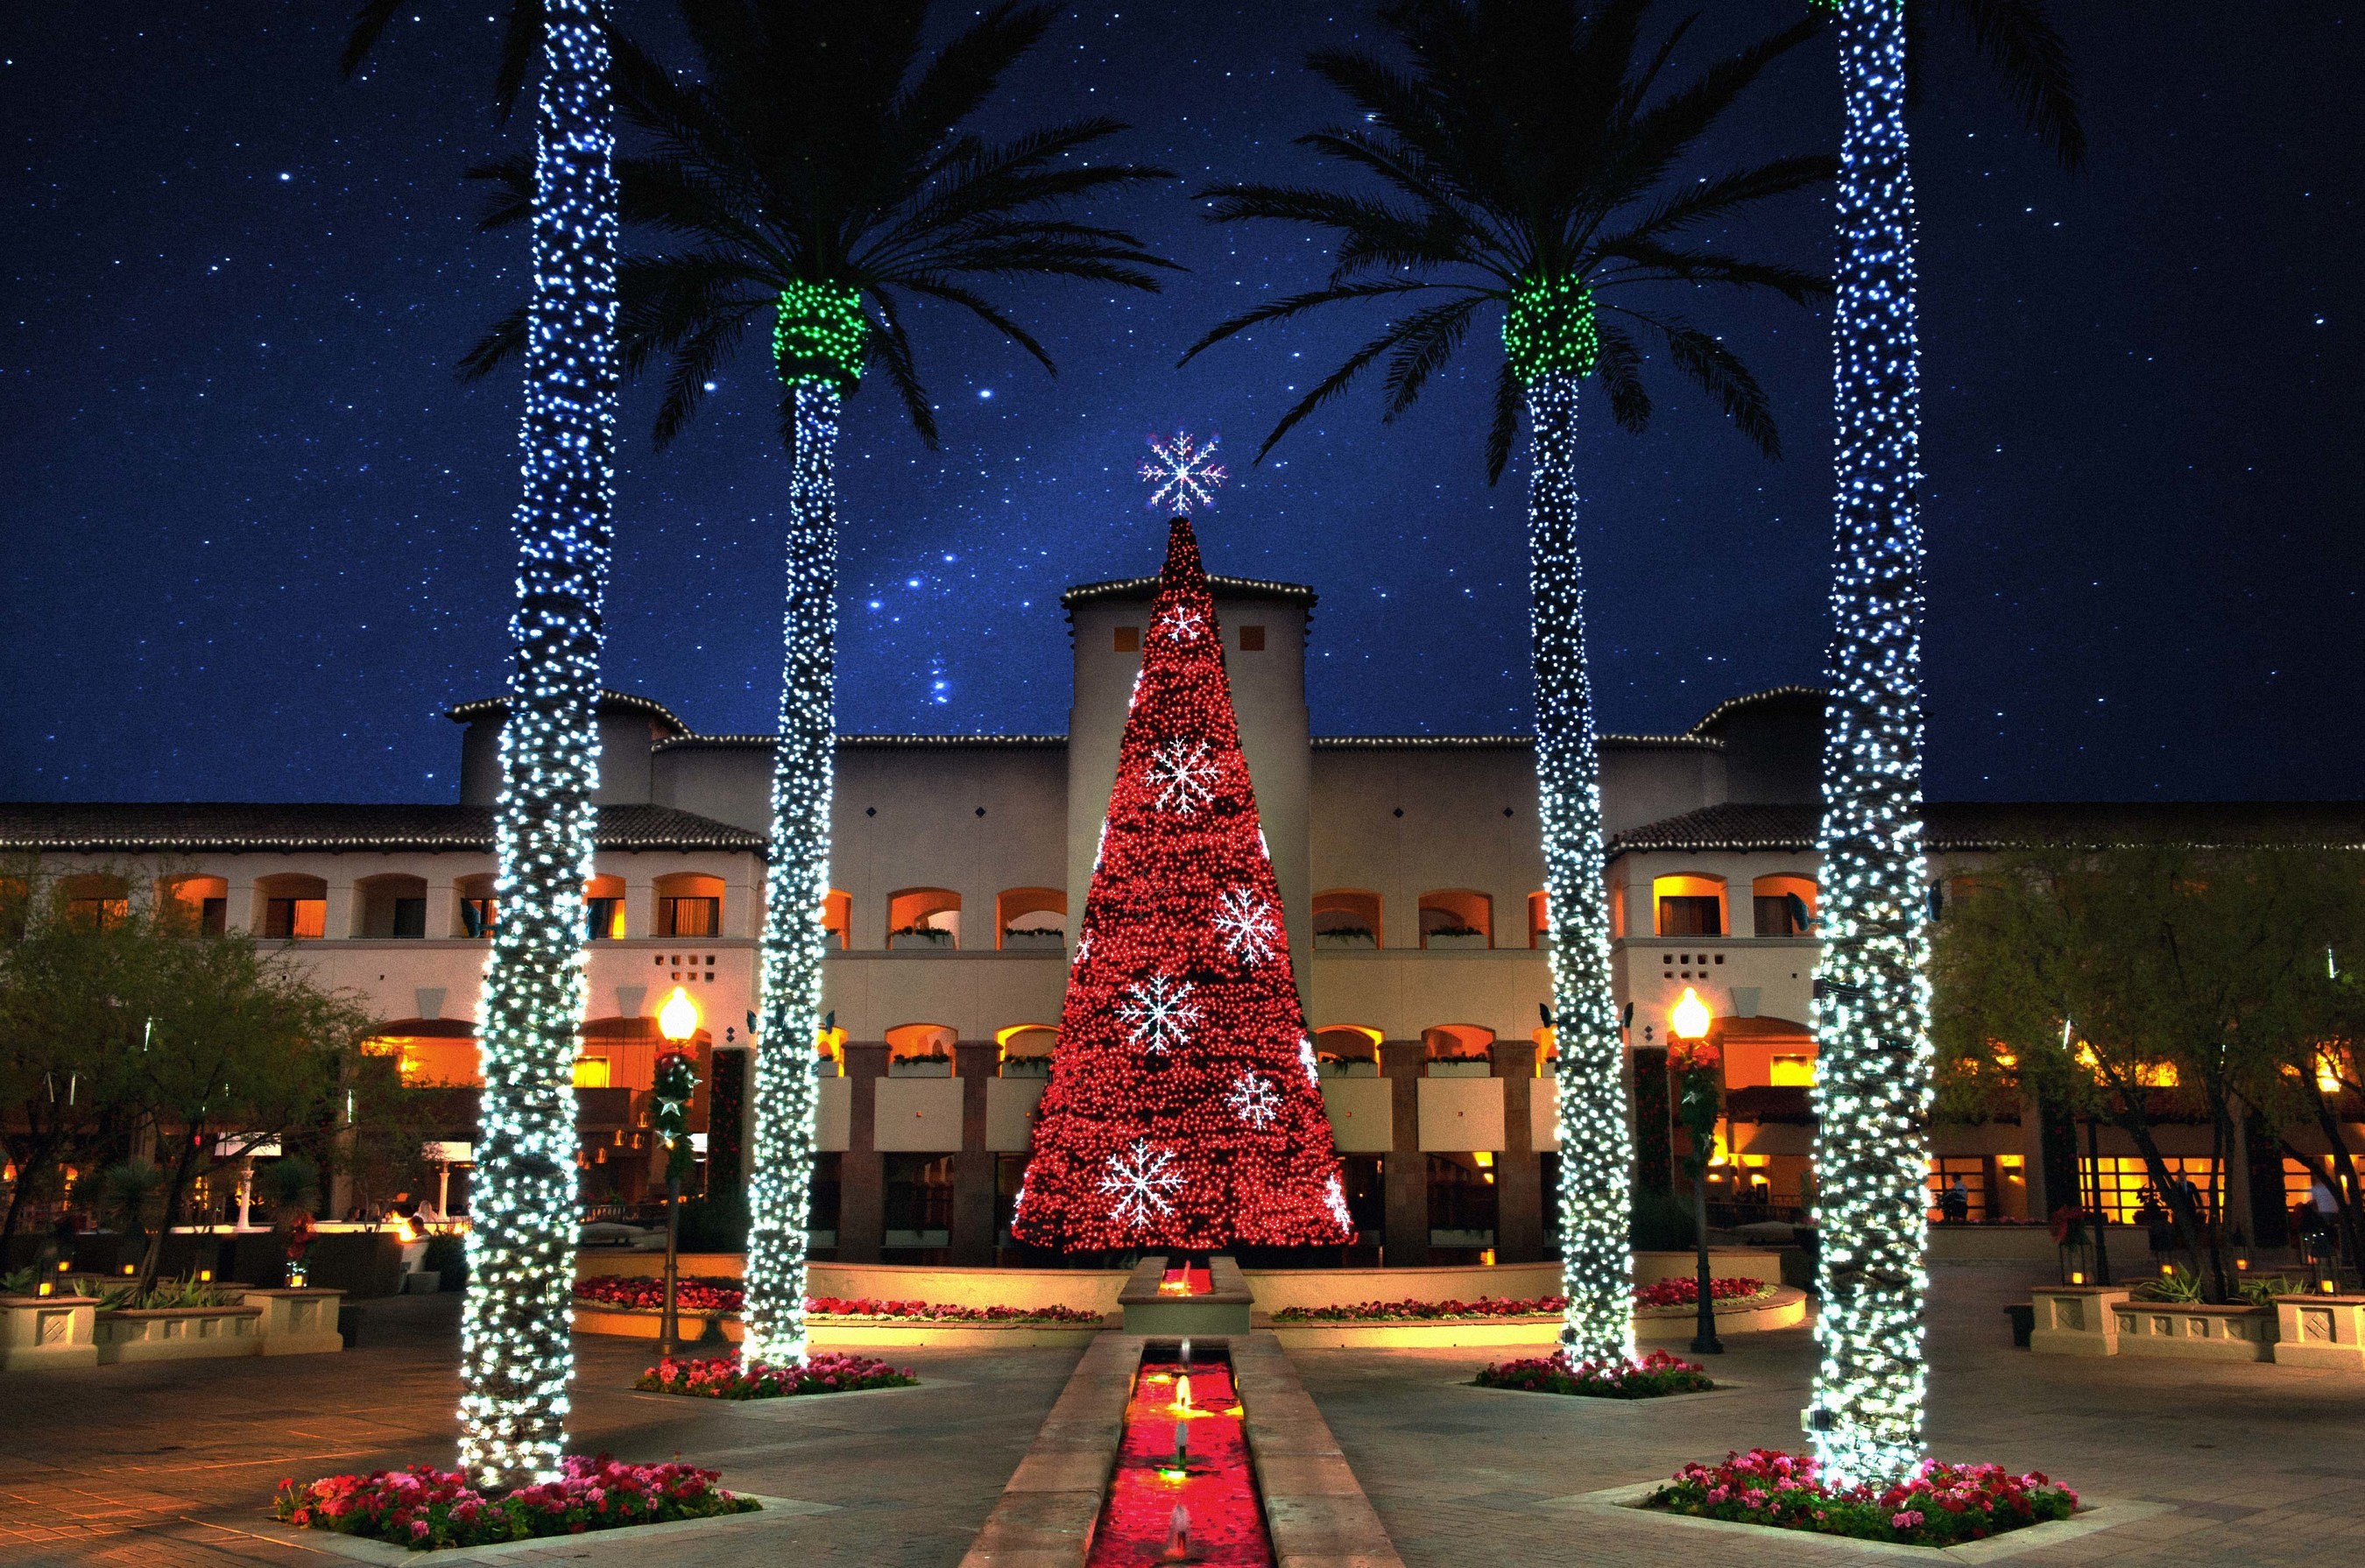 Fairmont Scottsdale’s Christmas At The Princess Early Bird Holiday